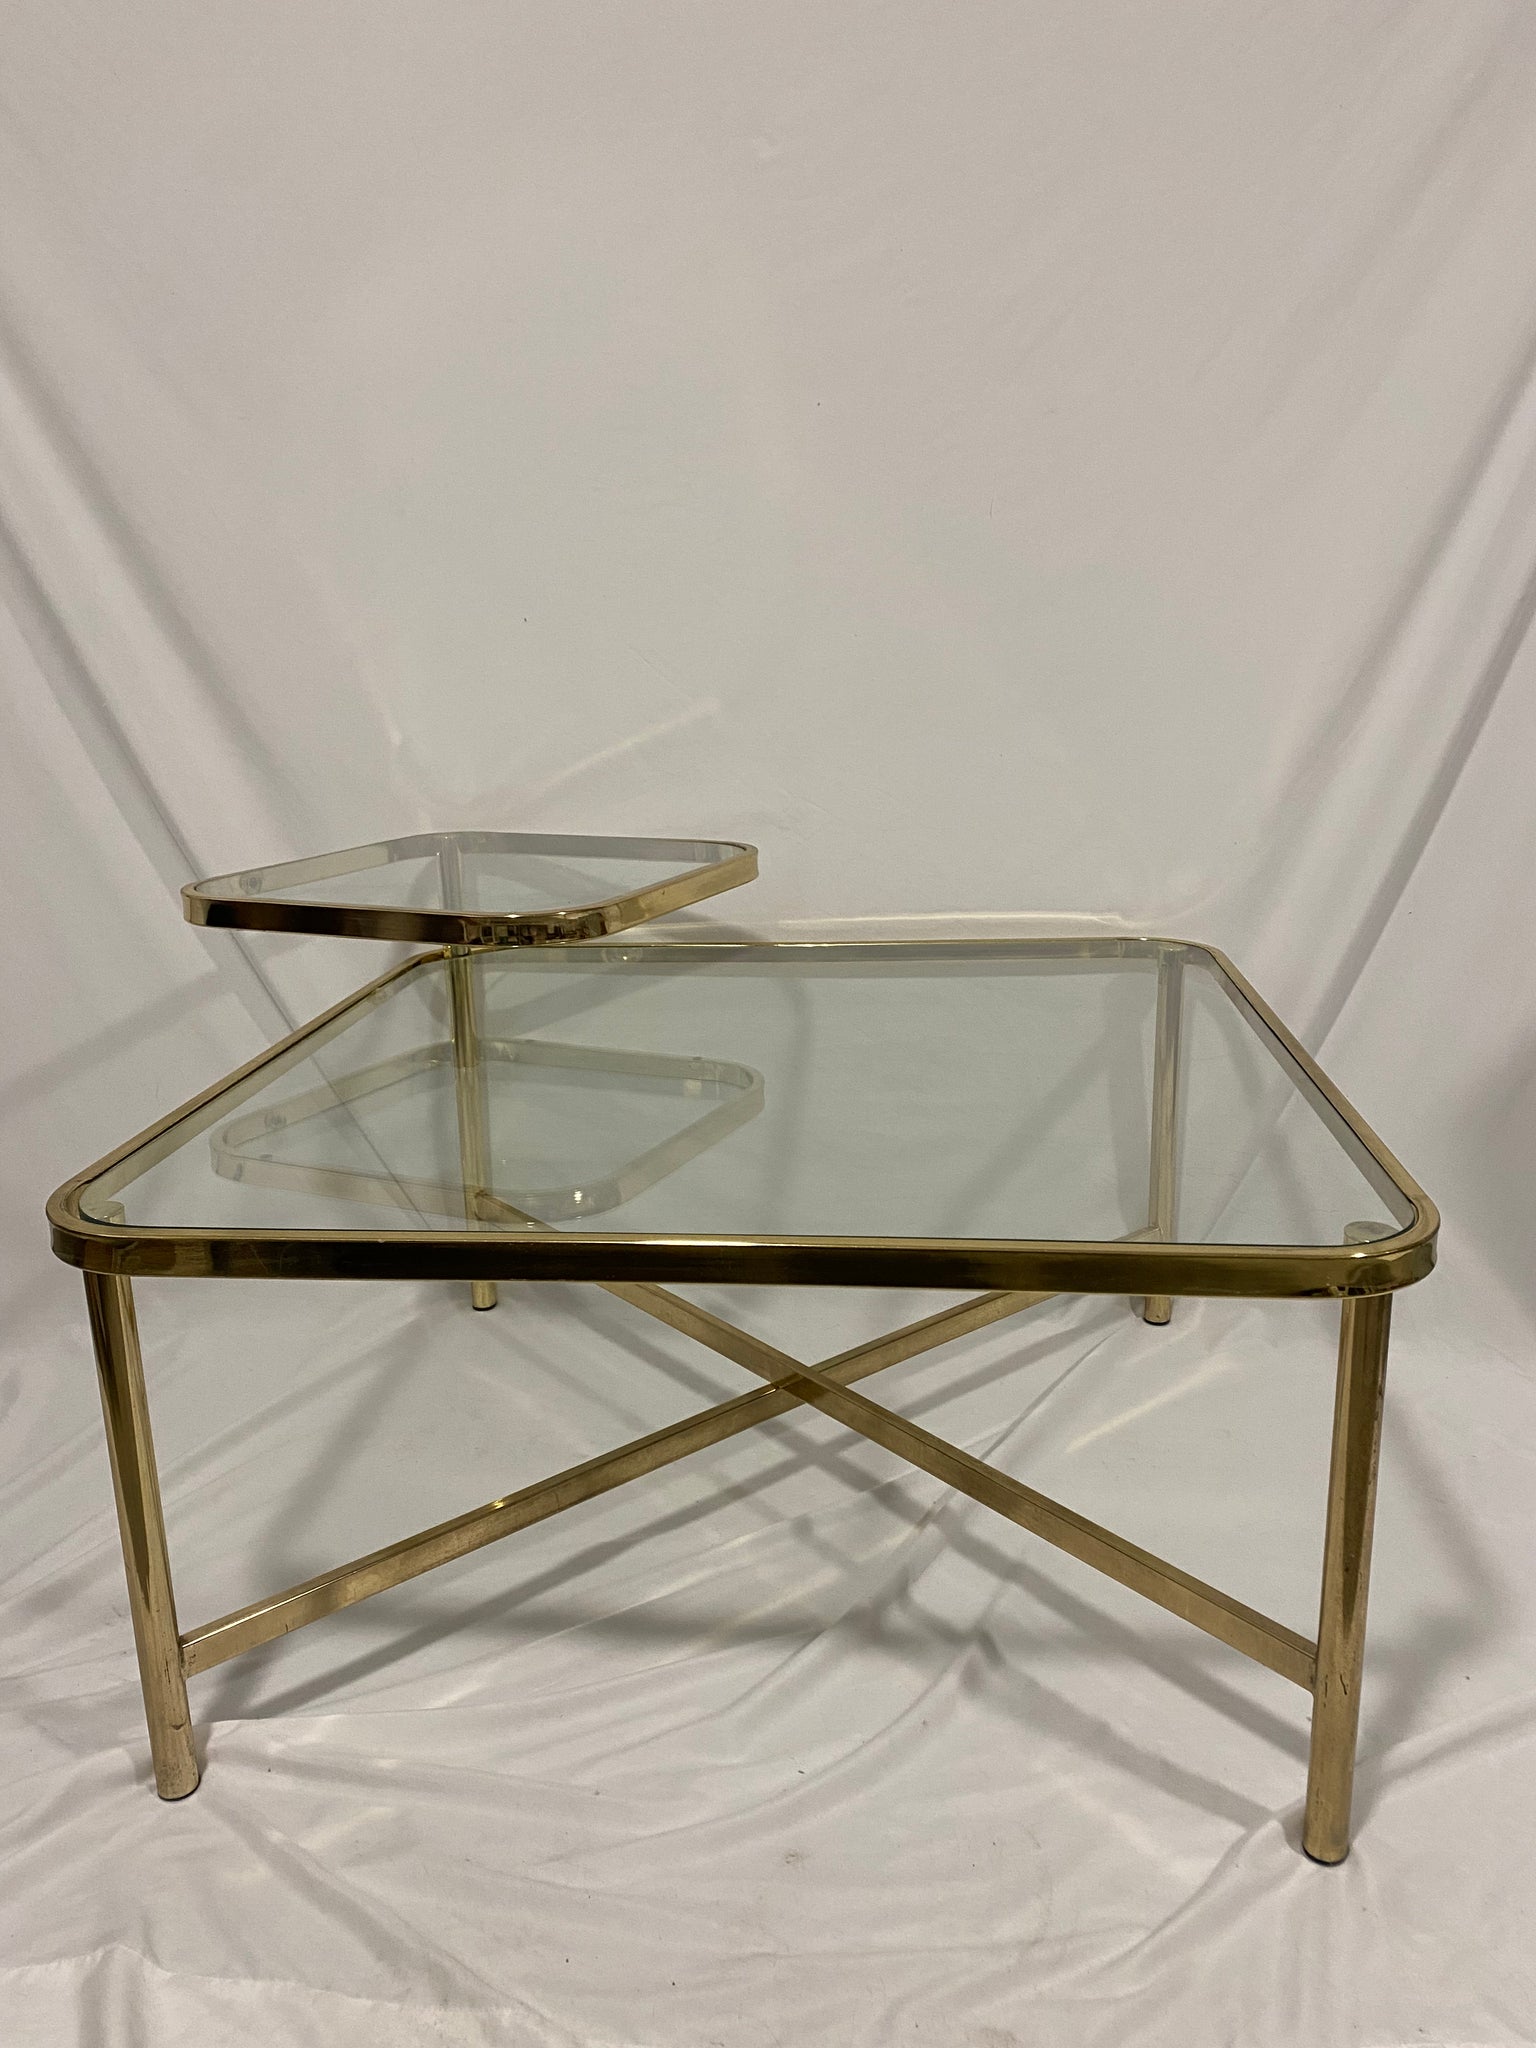 Golden brass square coffee table with swivel tablet